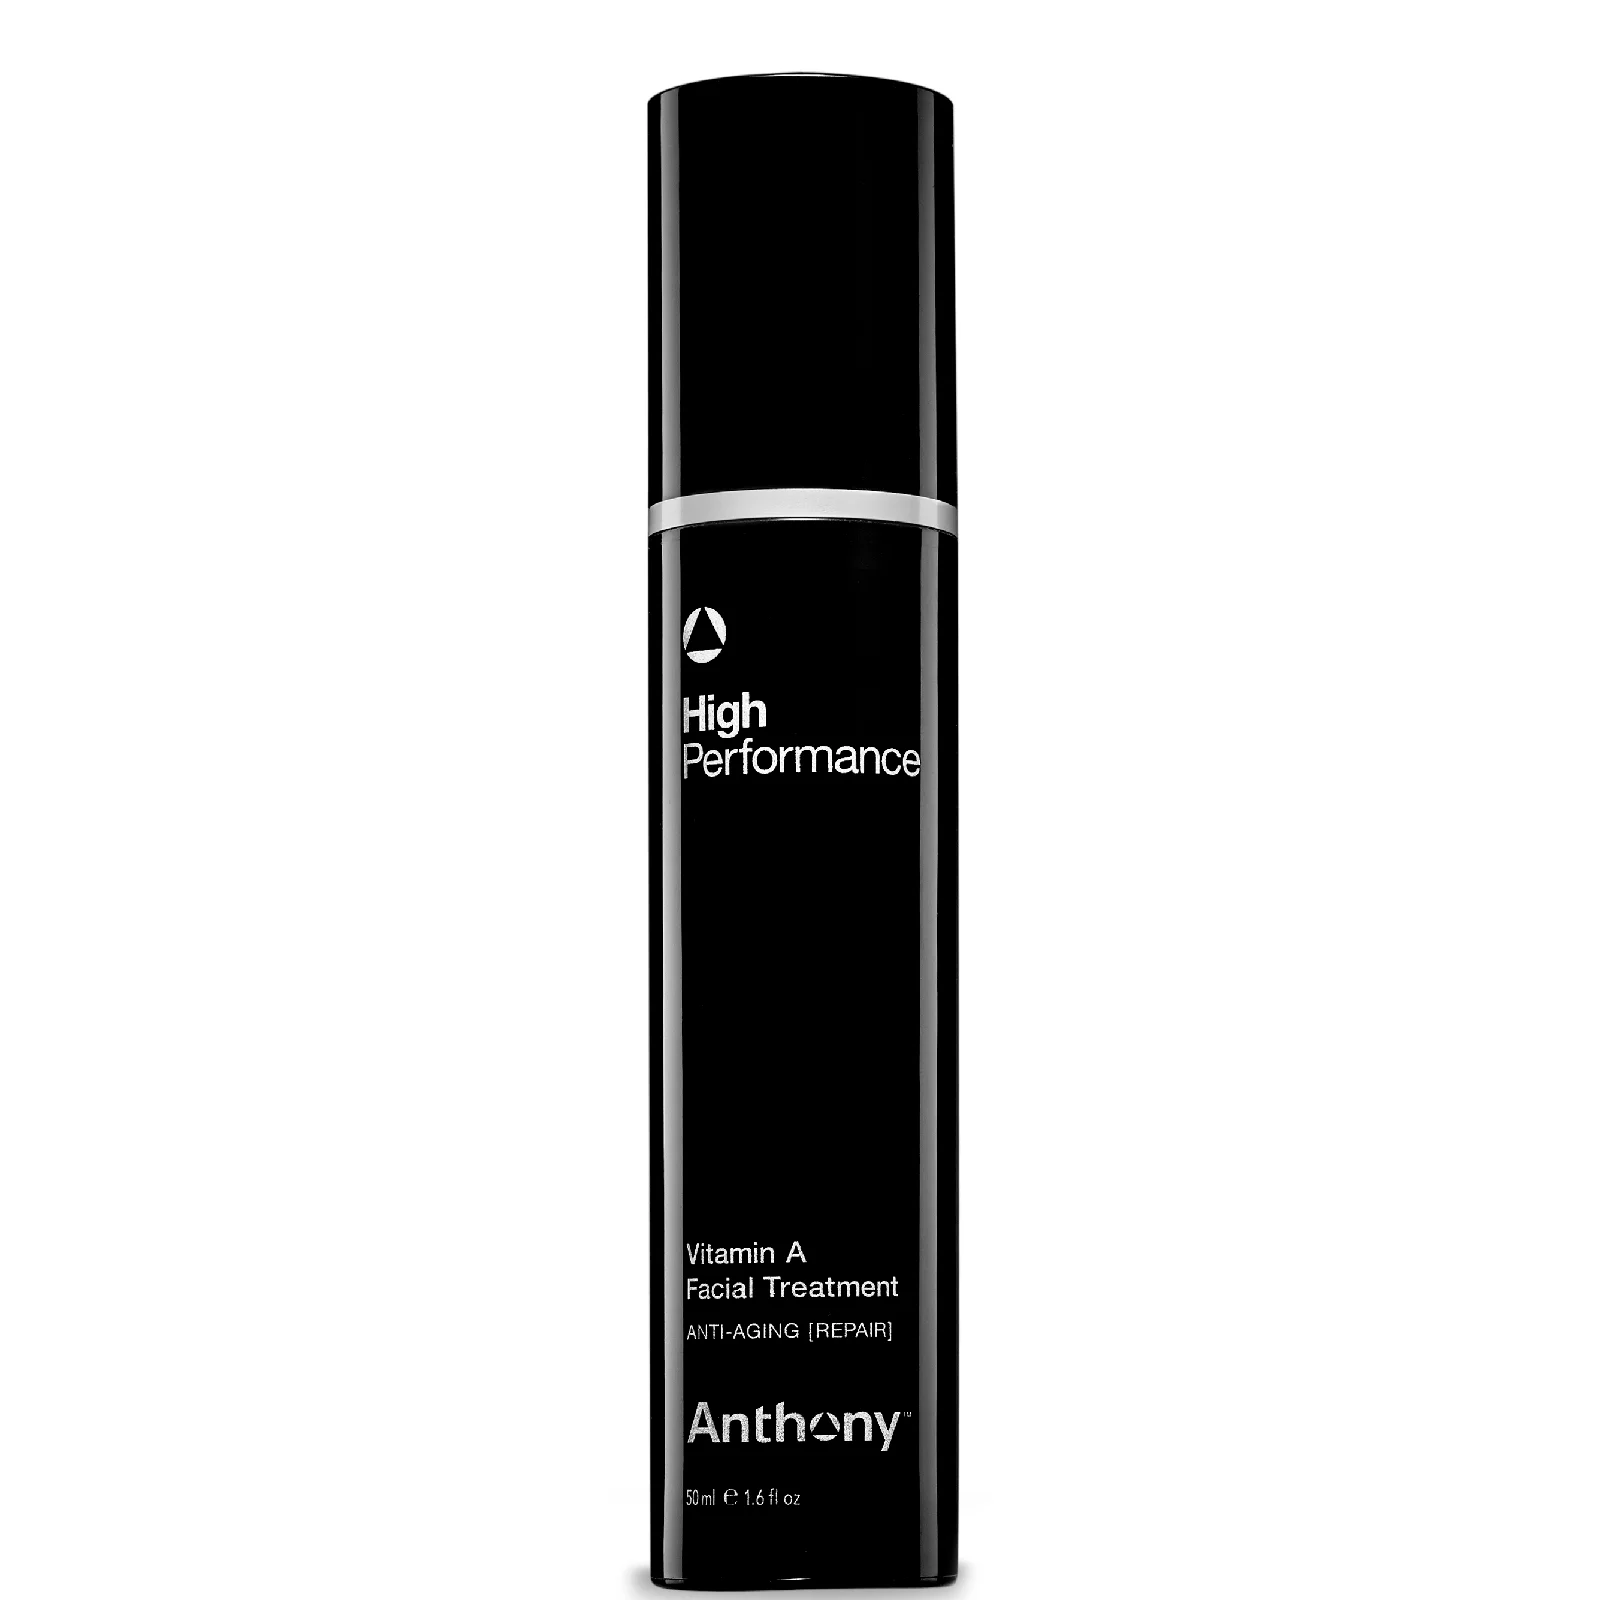 Anthony Vitamin A Anti-ageing Treatment (47ml) Image 1